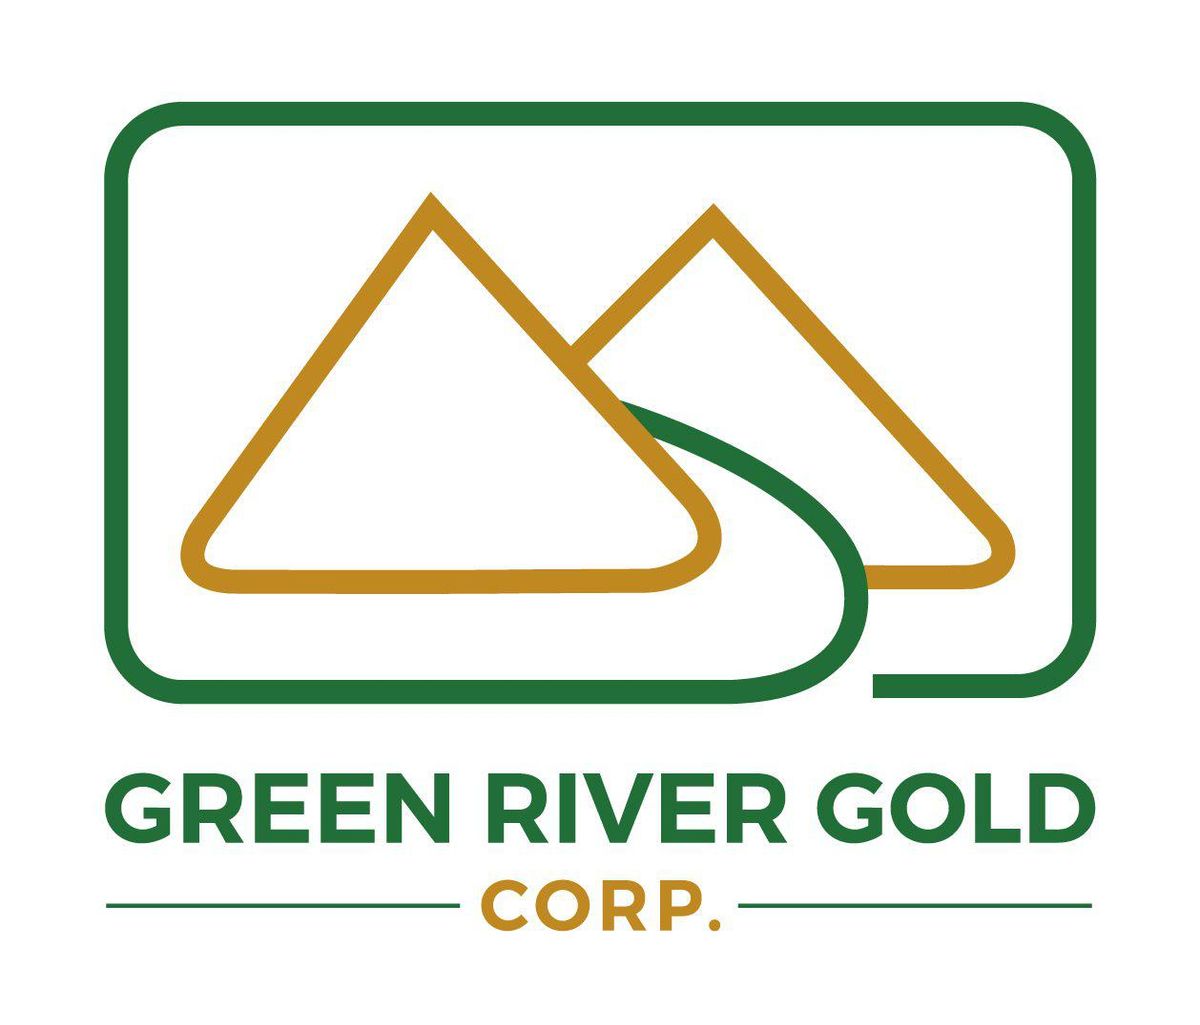 Green River Gold Corp. Announces Non- Brokered Private Placement Offering of Units and Flow-Through Shares